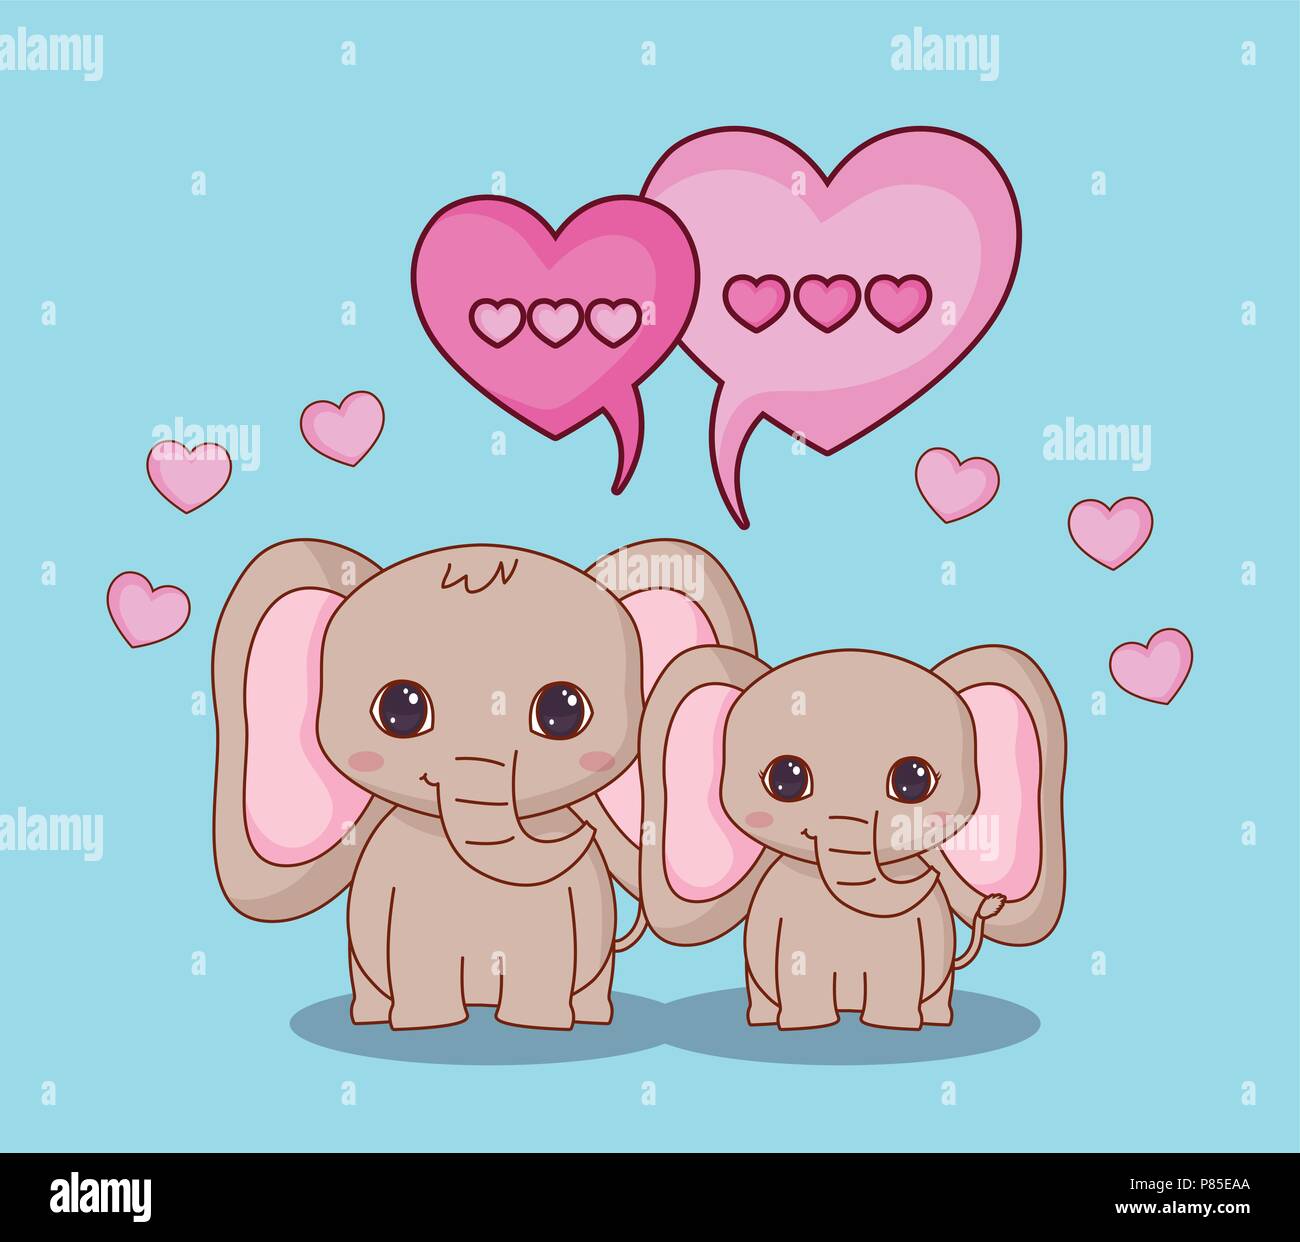 Cute elephants kawaii cartoon characters set. Adorable and funny animal  different poses and emotions isolated sticker, patch, kids illustration.  Anime baby girl elephants emoji on pink background 4816703 Vector Art at  Vecteezy